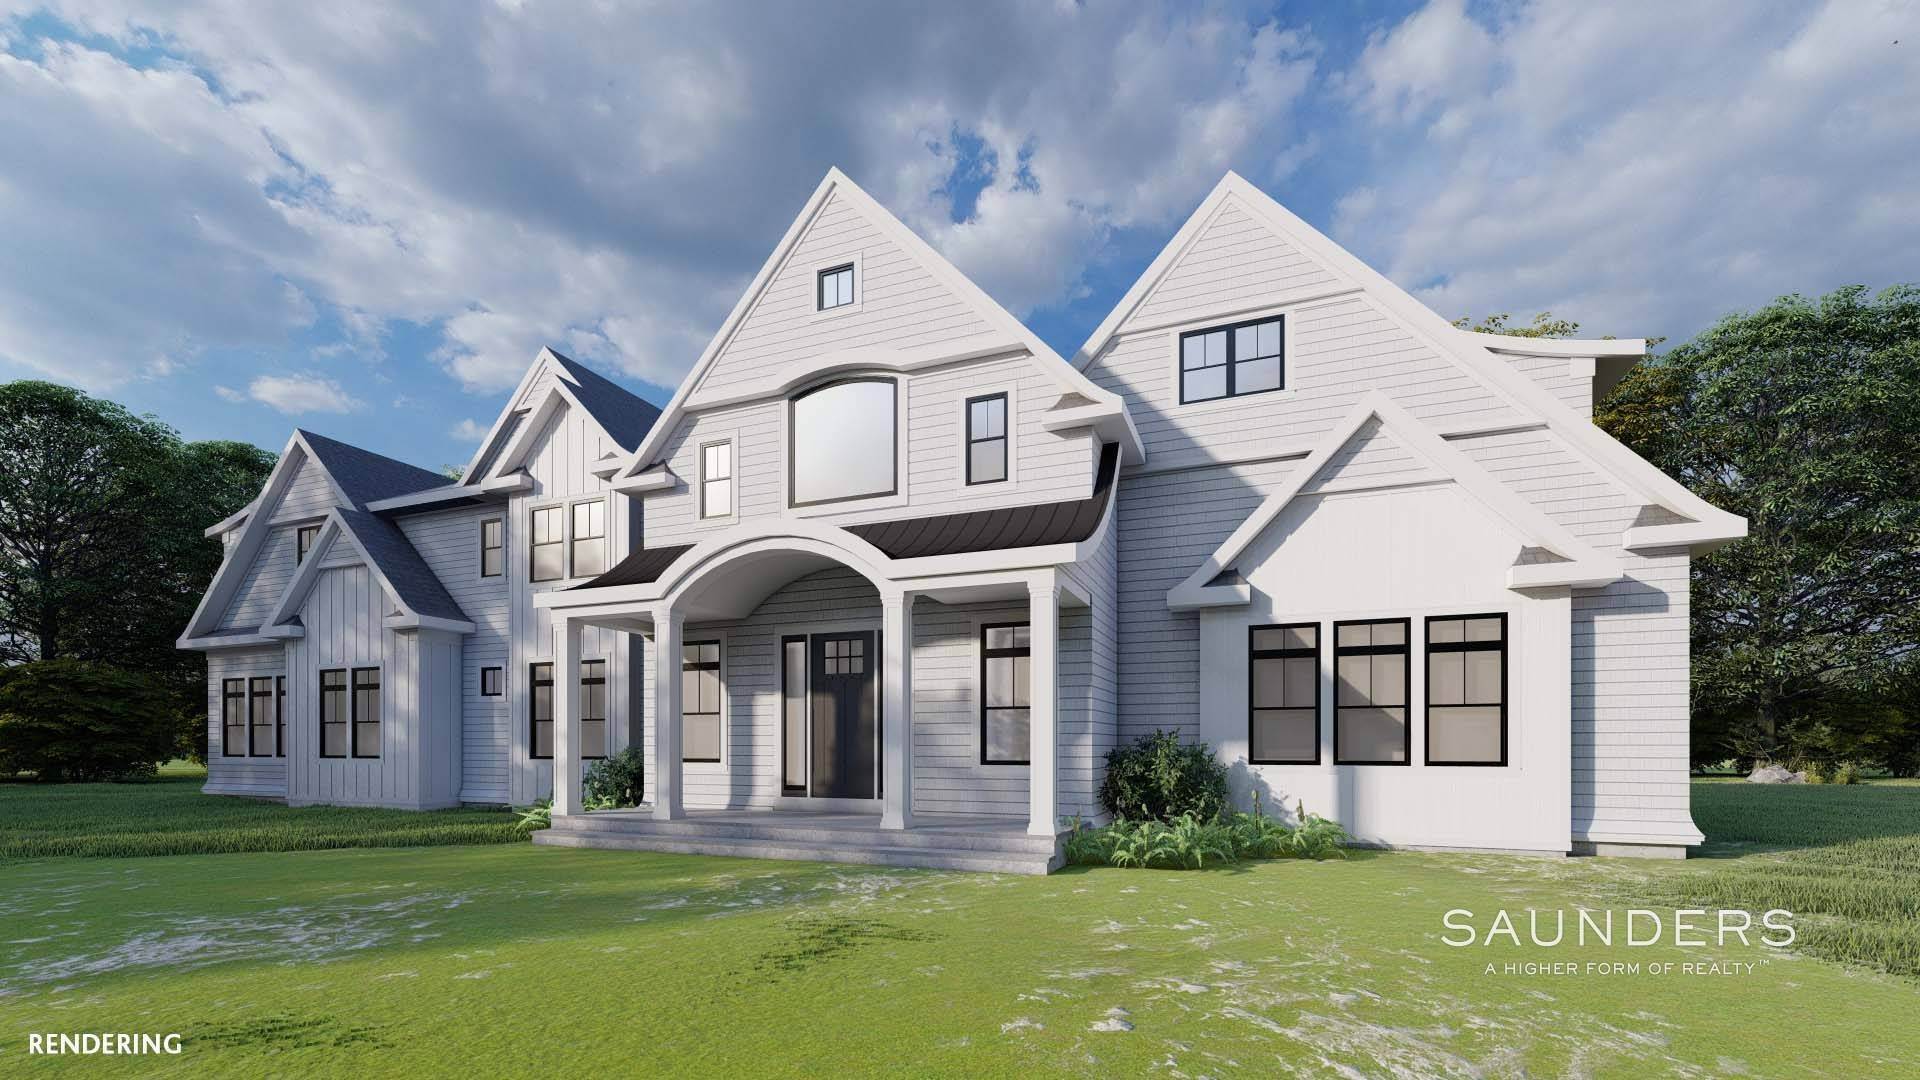 2. Single Family Homes for Sale at Sagaponack New Construction With Gunite Pool And Pool House 17 Forest Crossing, Sagaponack, NY 11962